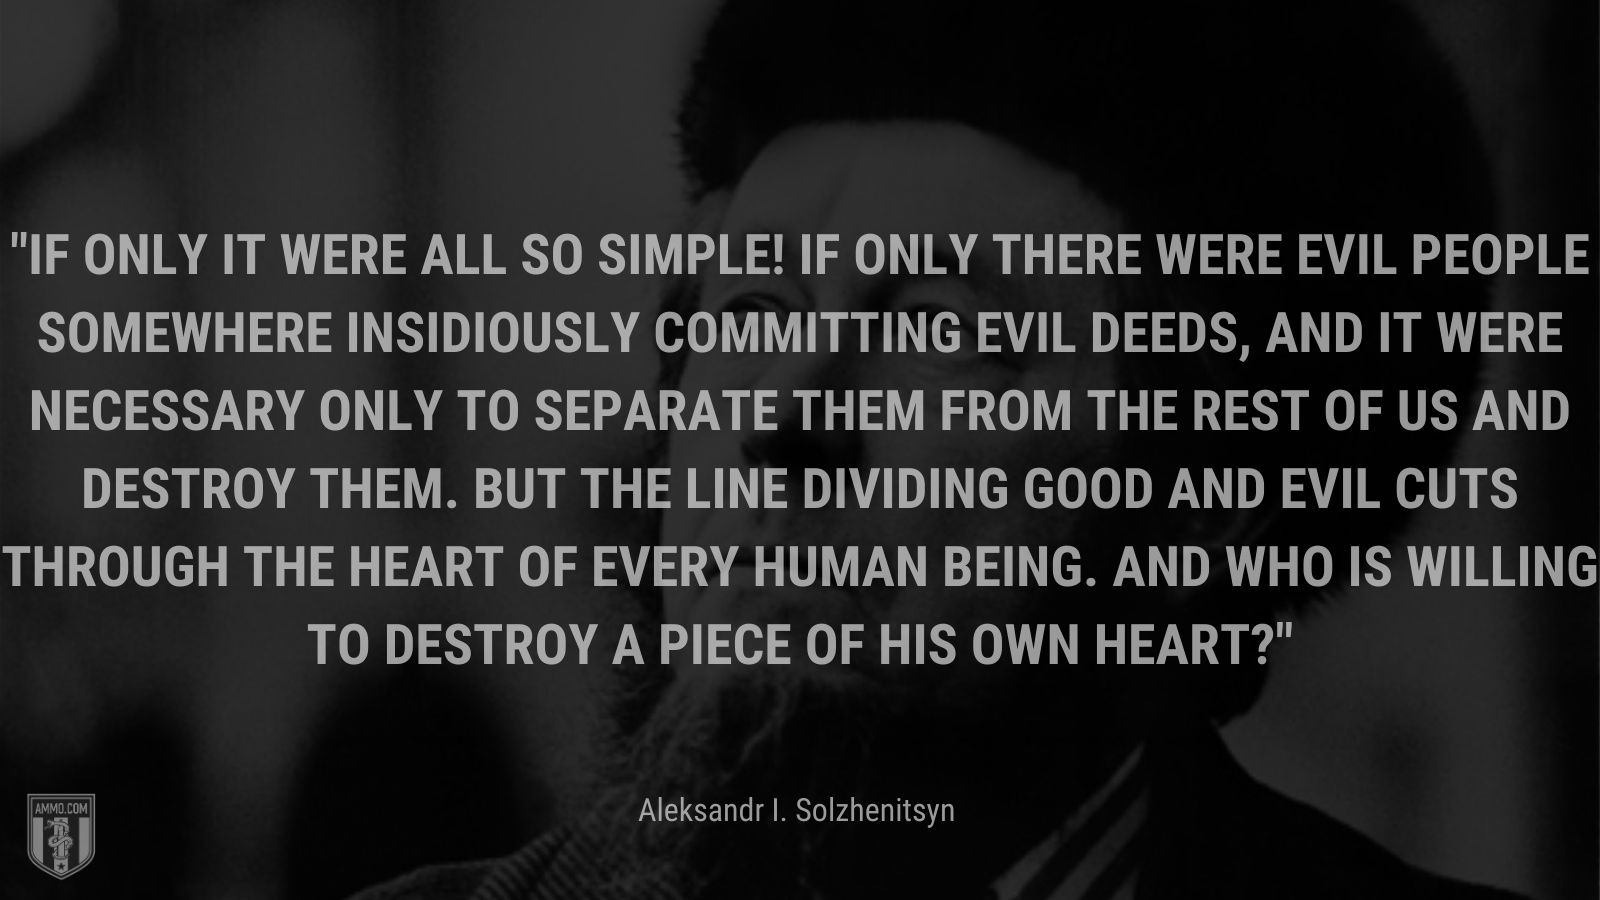 “If only it were all so simple! If only there were evil people somewhere insidiously committing evil deeds, and it were necessary only to separate them from the rest of us and destroy them. But the line dividing good and evil cuts through the heart of every human being. And who is willing to destroy a piece of his own heart?” - Aleksandr I. Solzhenitsyn